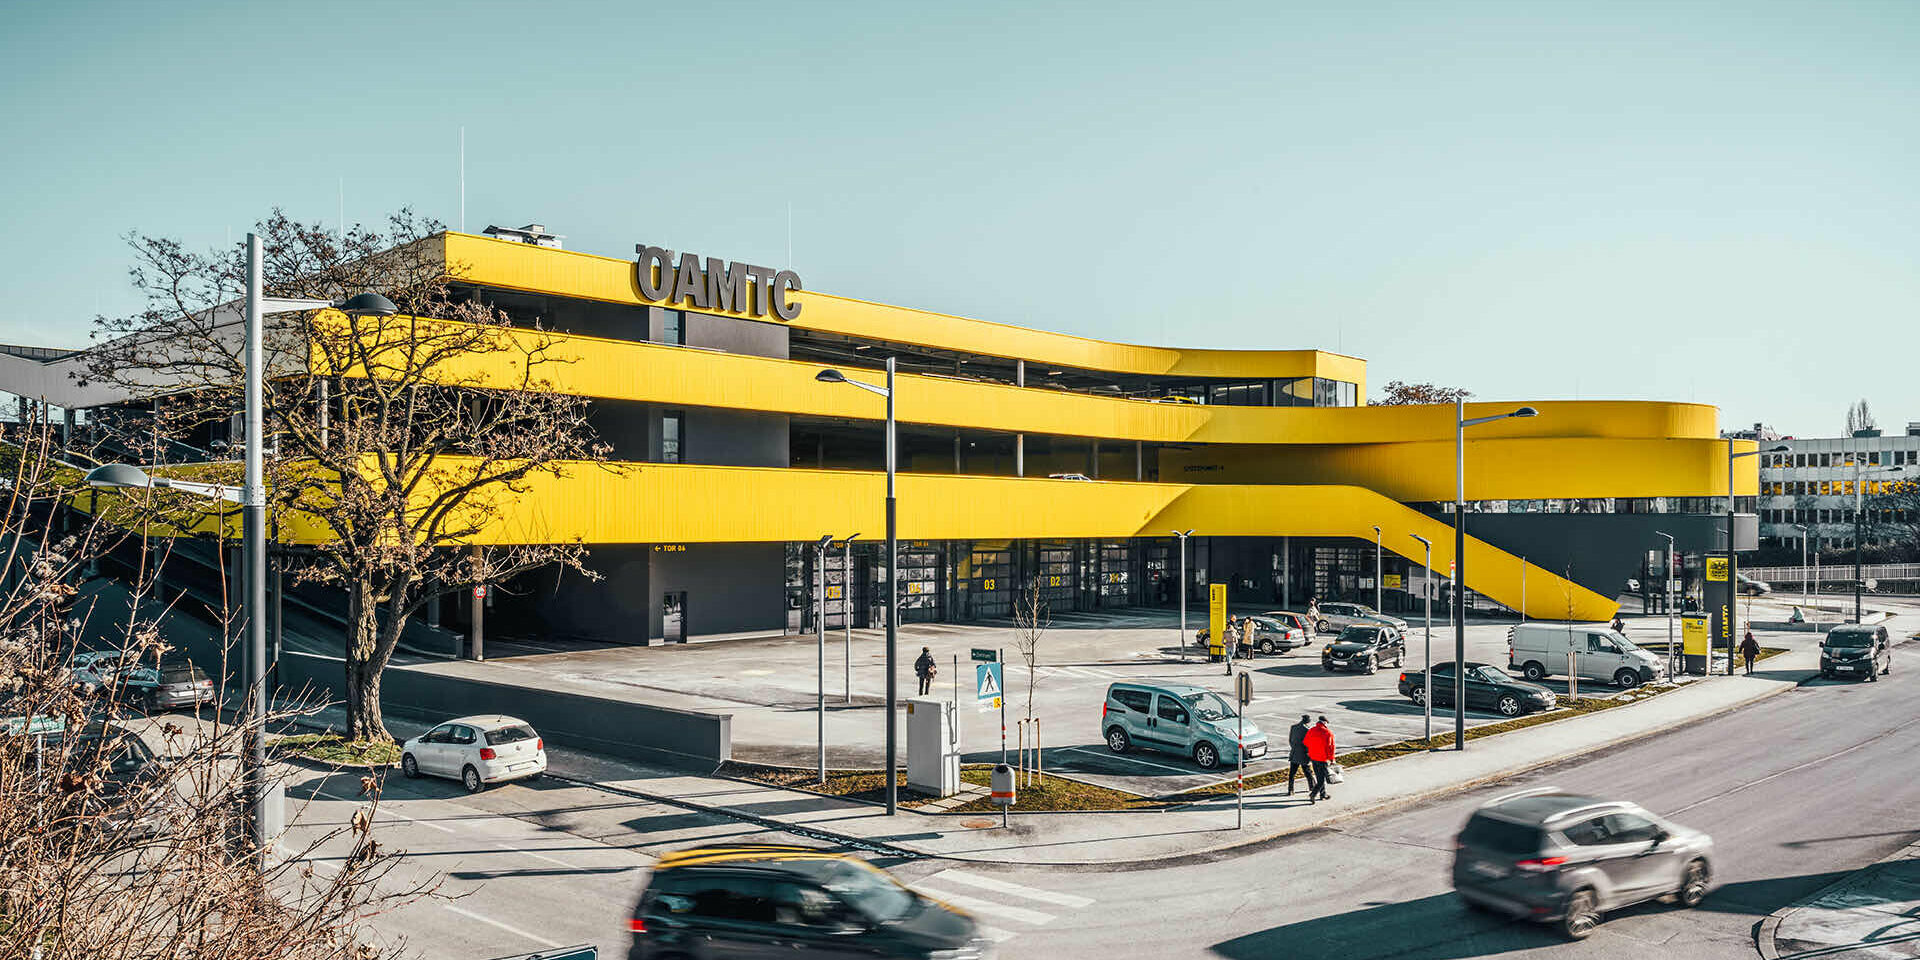 Wide-angle view of the new ÖAMTC building in Vienna. the yellow façade immediately stands out and becomes an eye-catcher.